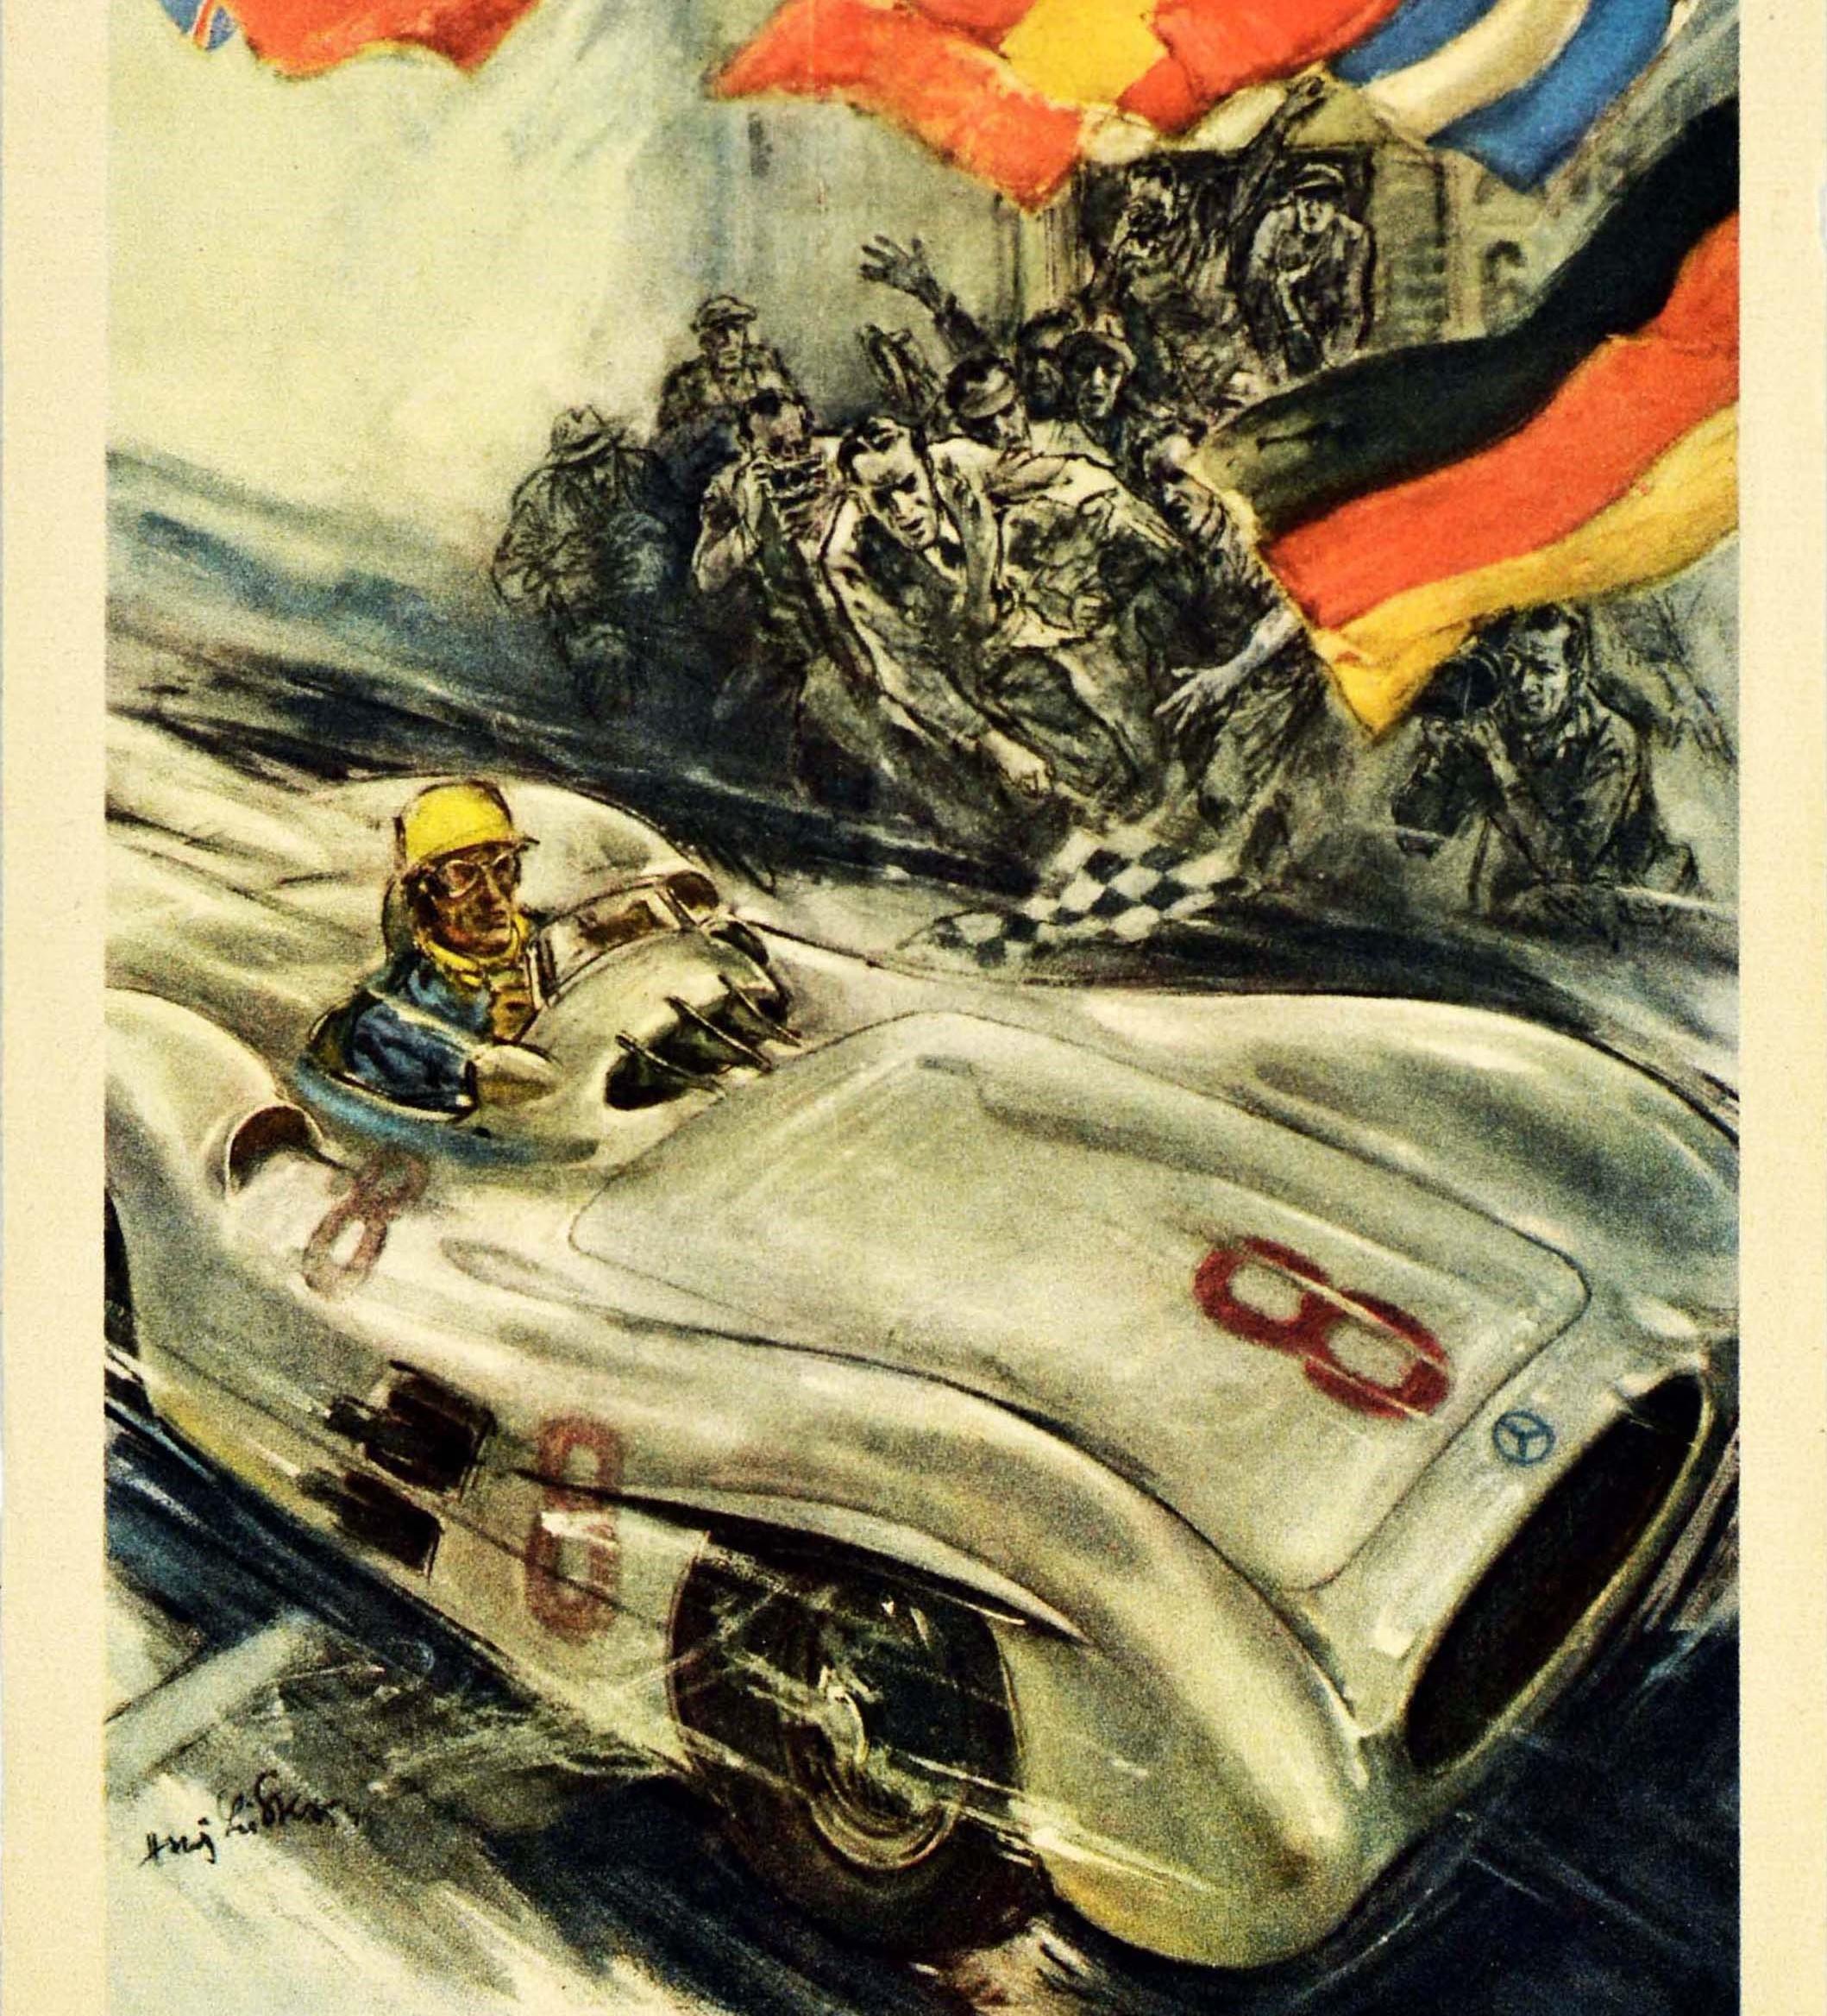 Original vintage double-sided poster published in Swedish by Mercedes Benz to celebrate its racing results in 1954 and 1955. Fantastic illustration on the front depicting a number 8 silver Mercedes-Benz 300 SLR Roadster racing car crossing the